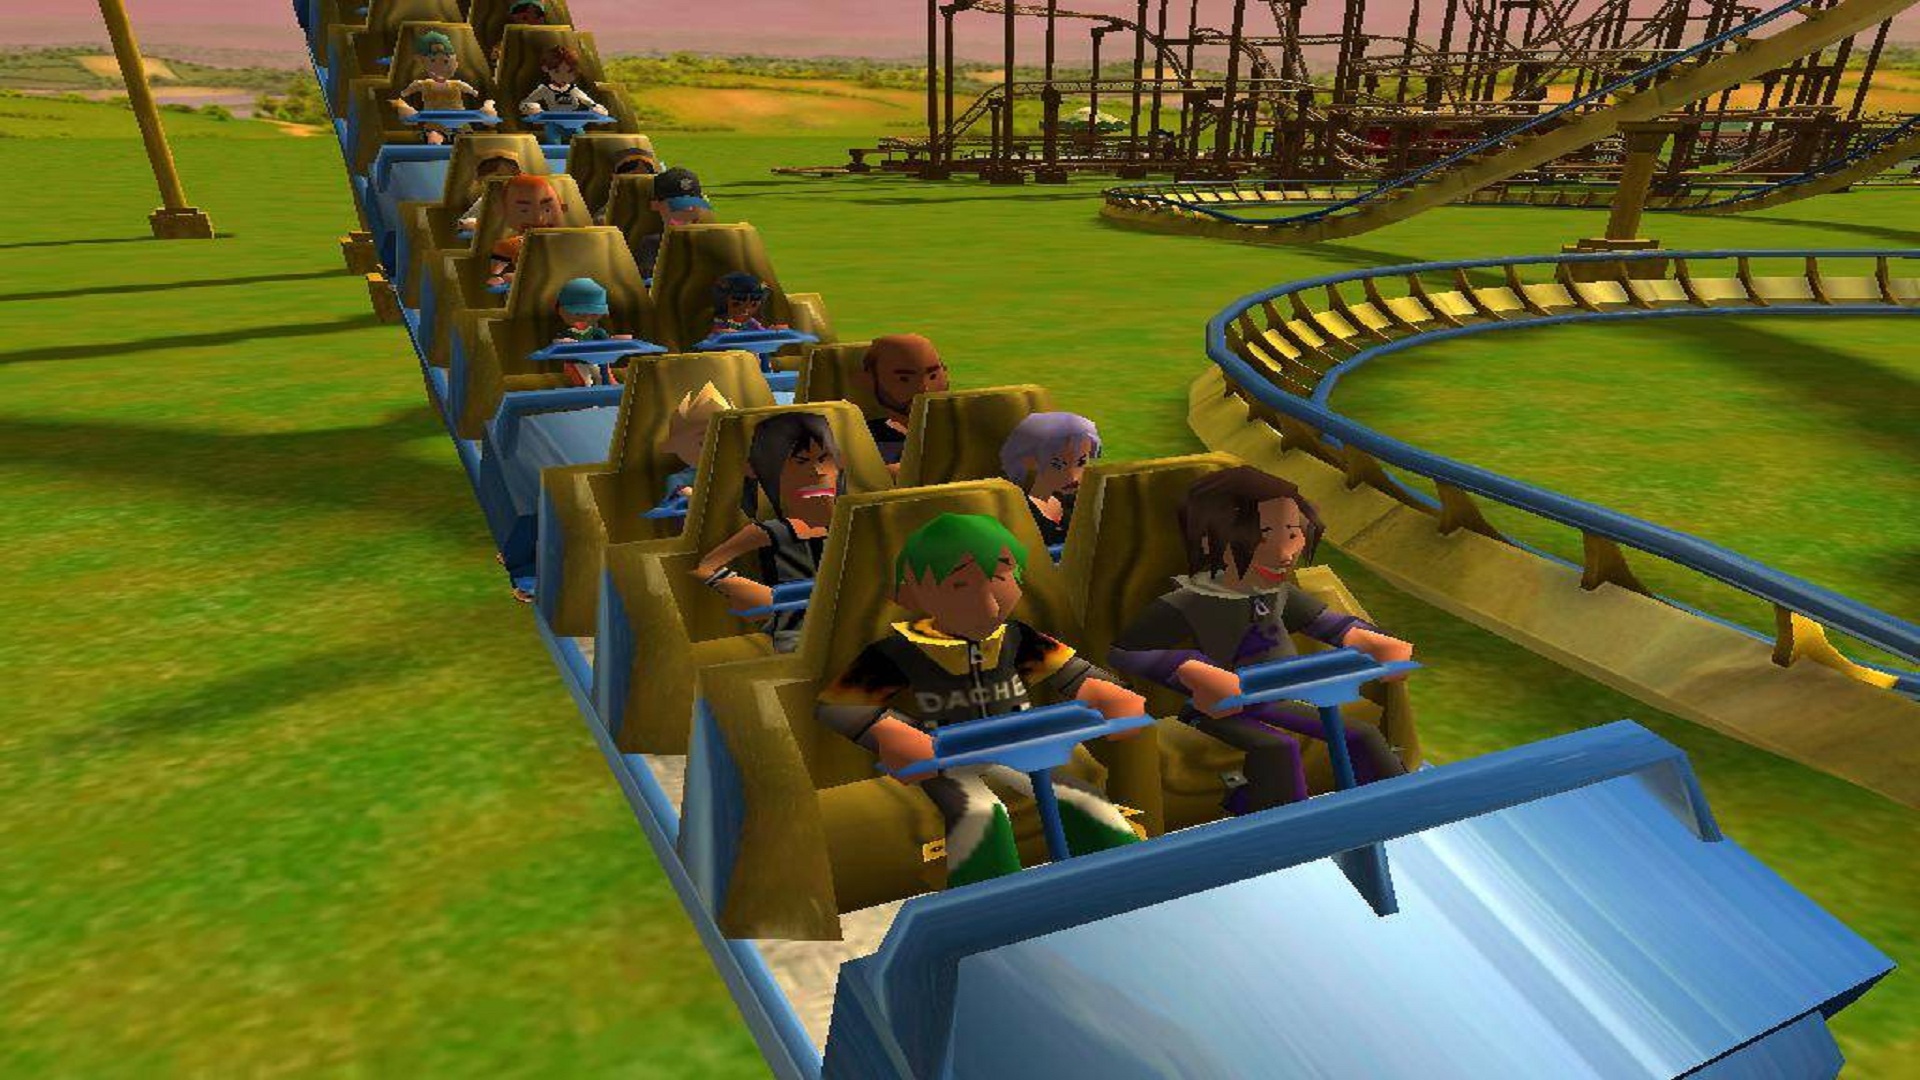 rollercoaster tycoon 3 platinum review